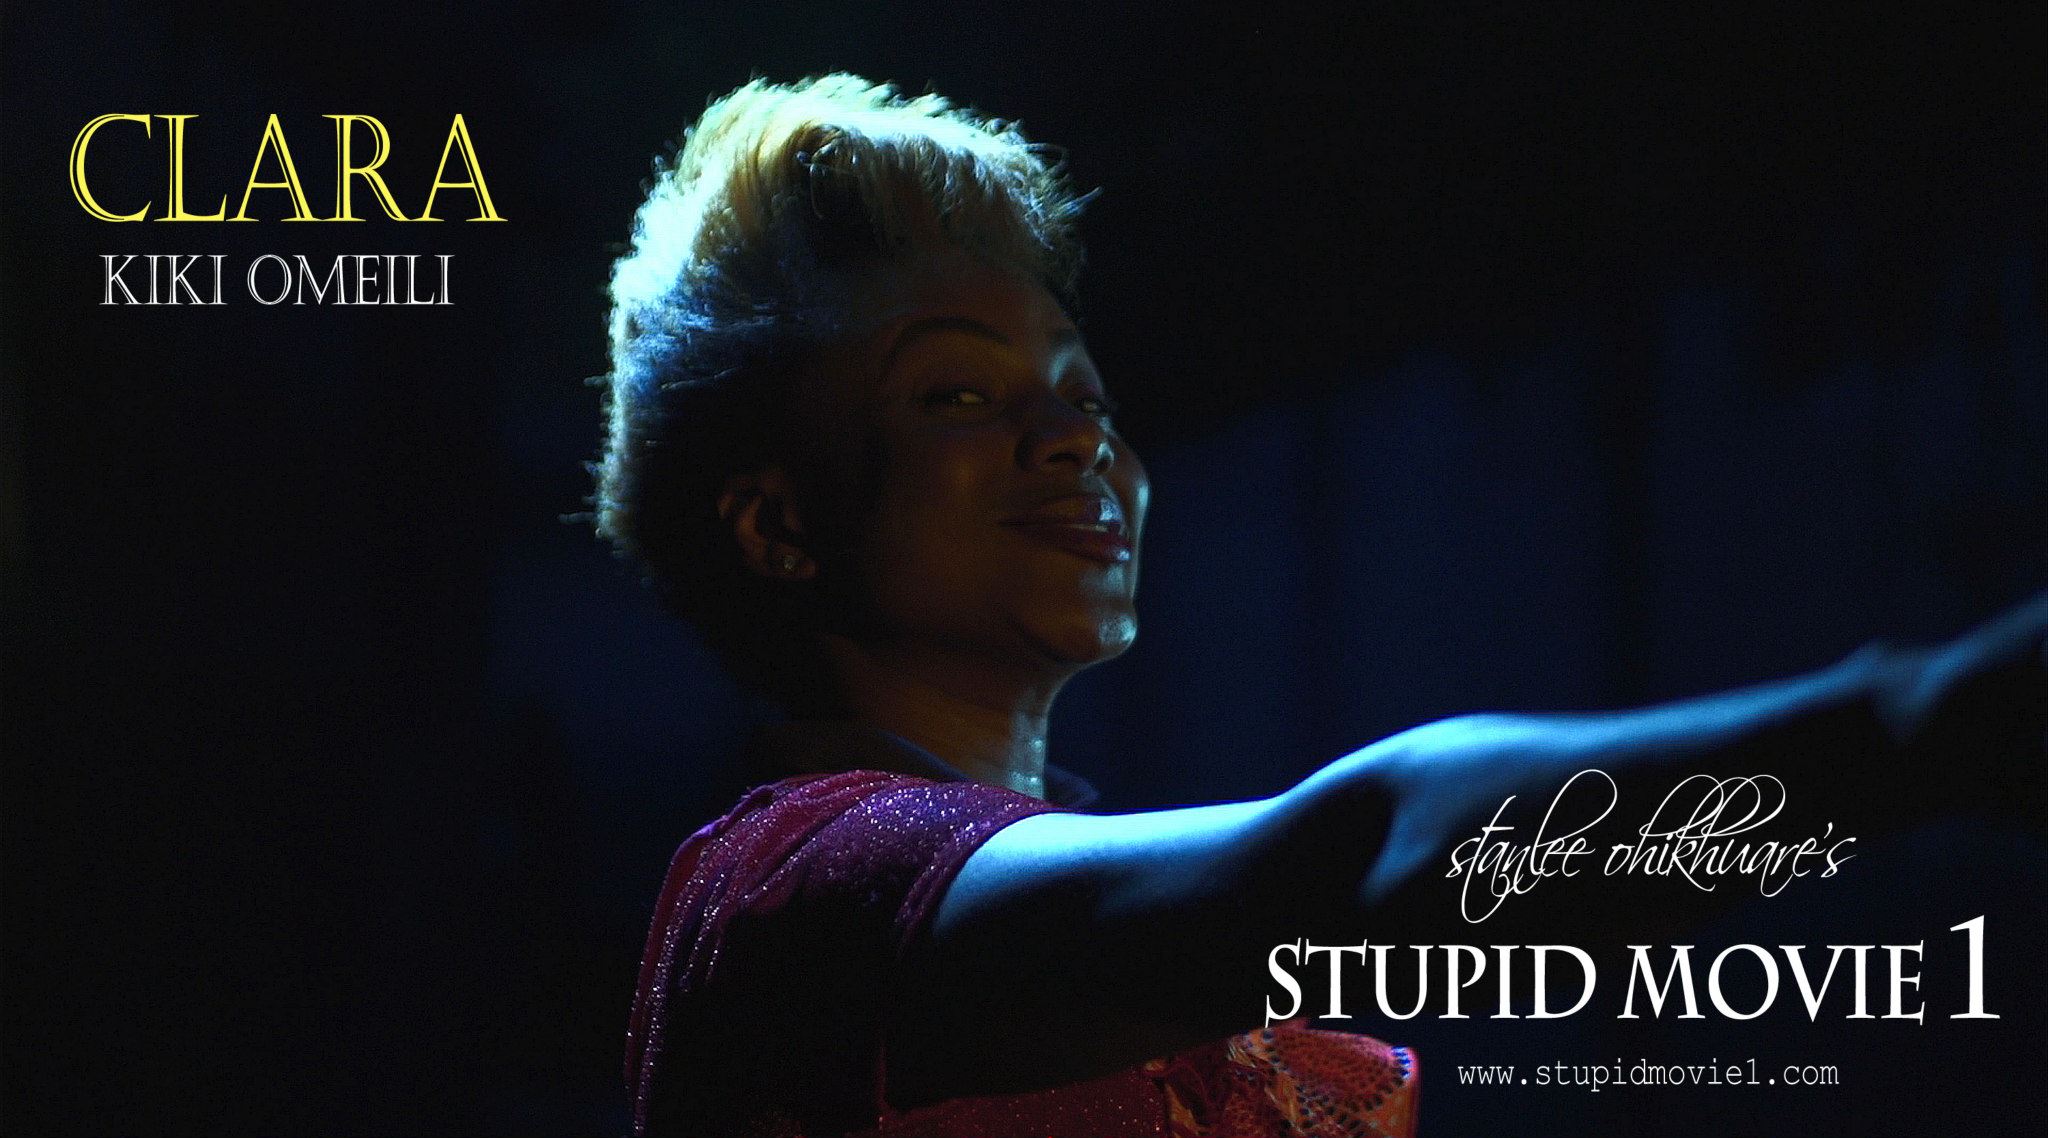 CHARACTER POSTER (CLARA - Kiki Omeili) for Stanlee Ohikhuare's STUPID MOVIE 1